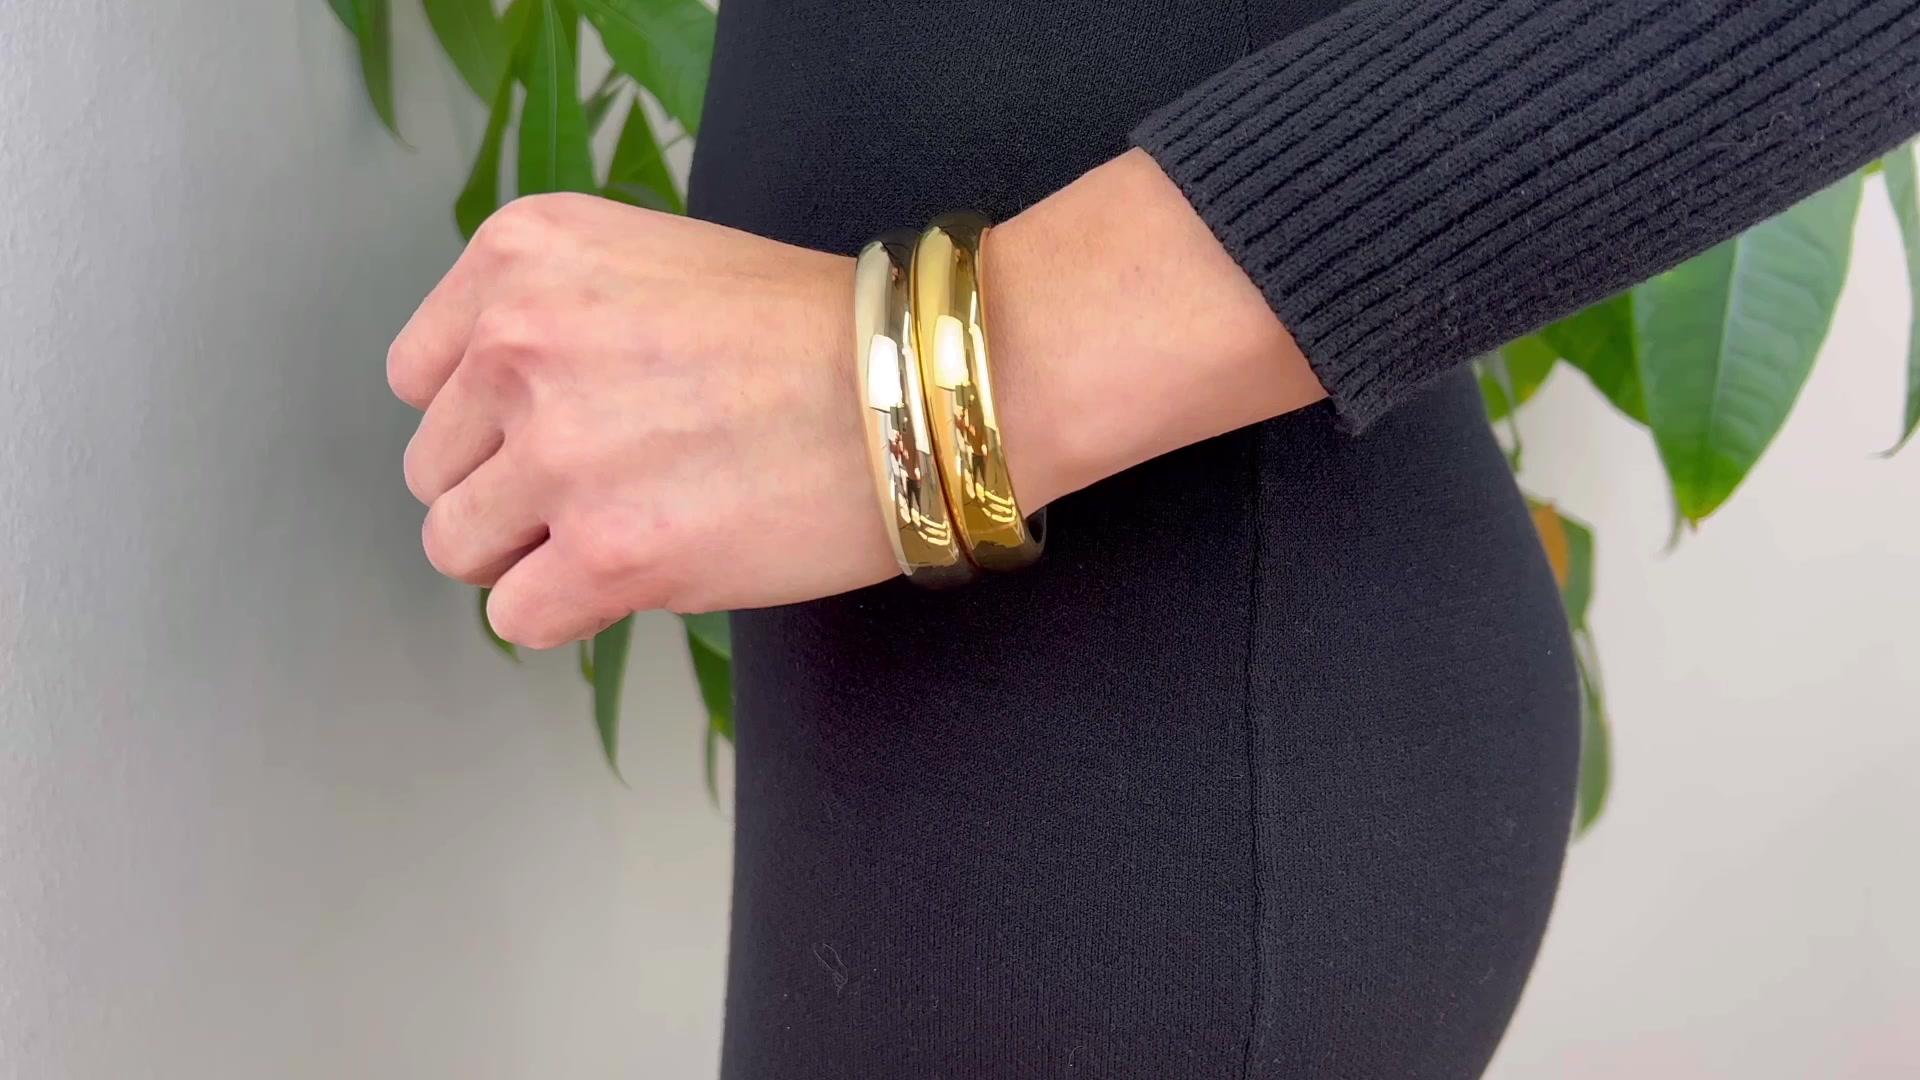 One Pomellato Italian 18 Karat Gold Iconica Bangle Bracelet Set. Crafted in 18 karat yellow and rose gold signed Pomellato with Italian hallmarks. Circa 2000. The bracelets are 6 3/4 inches in circumference.

About this Item: Imagine embodying the